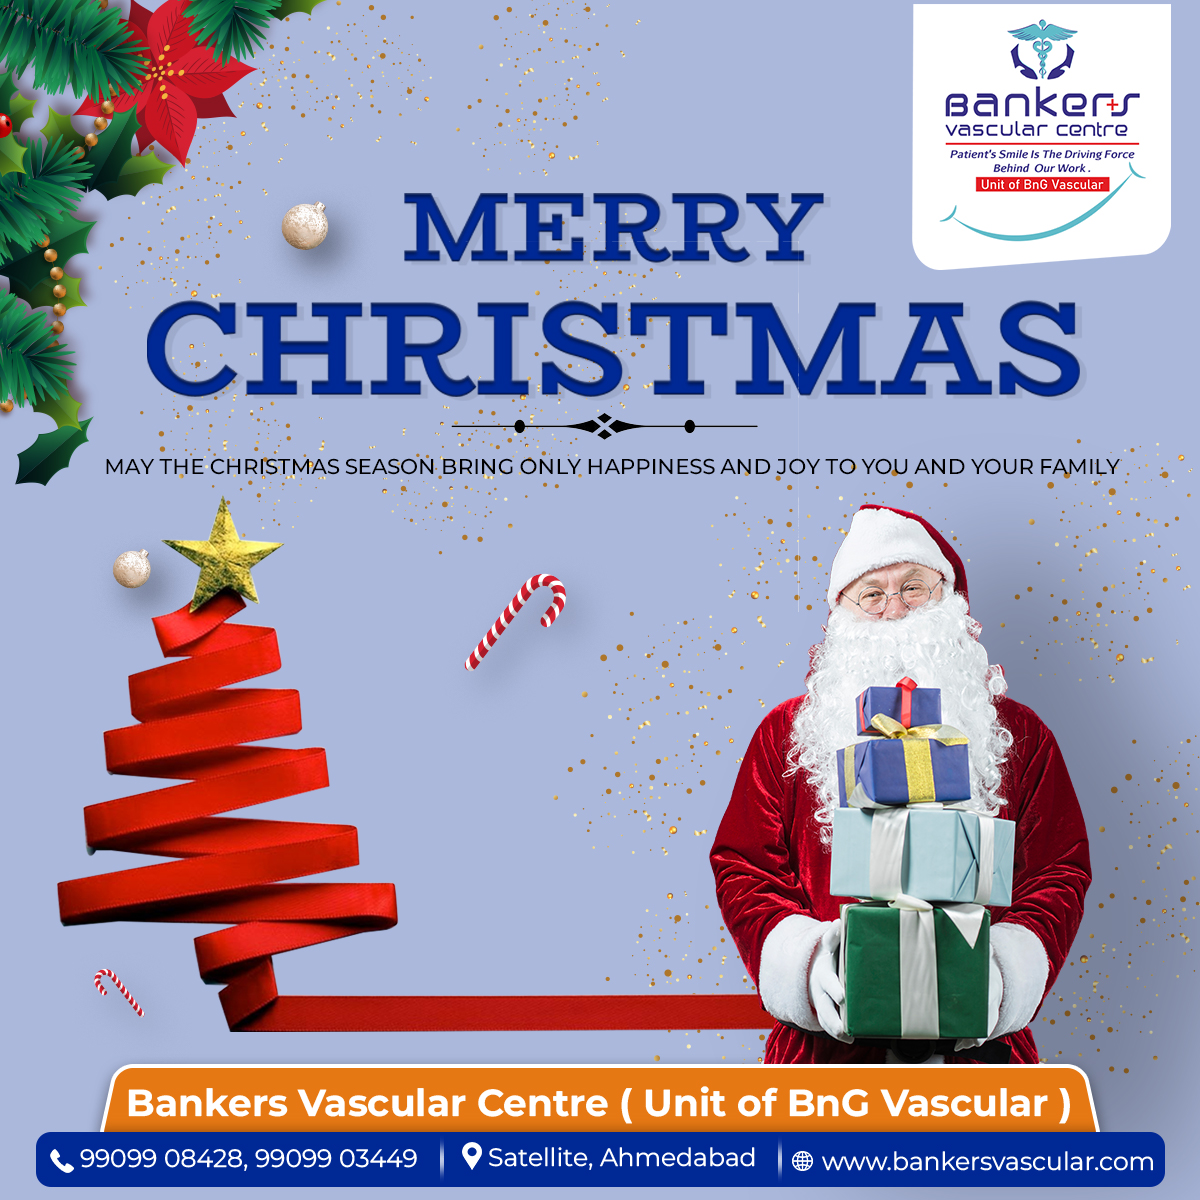 The Banker'S Family Wishes You All A Very Merry Christmas. May You All Have A Healthy And Happy Year Ahead. If You Have Any Vascular Ailments To Tend To , Trust Us, Trust Banker'S Vascular Centre.

#christmas2022 #merrychristmas #vasculartreatment #varicosevein #bankersvascular